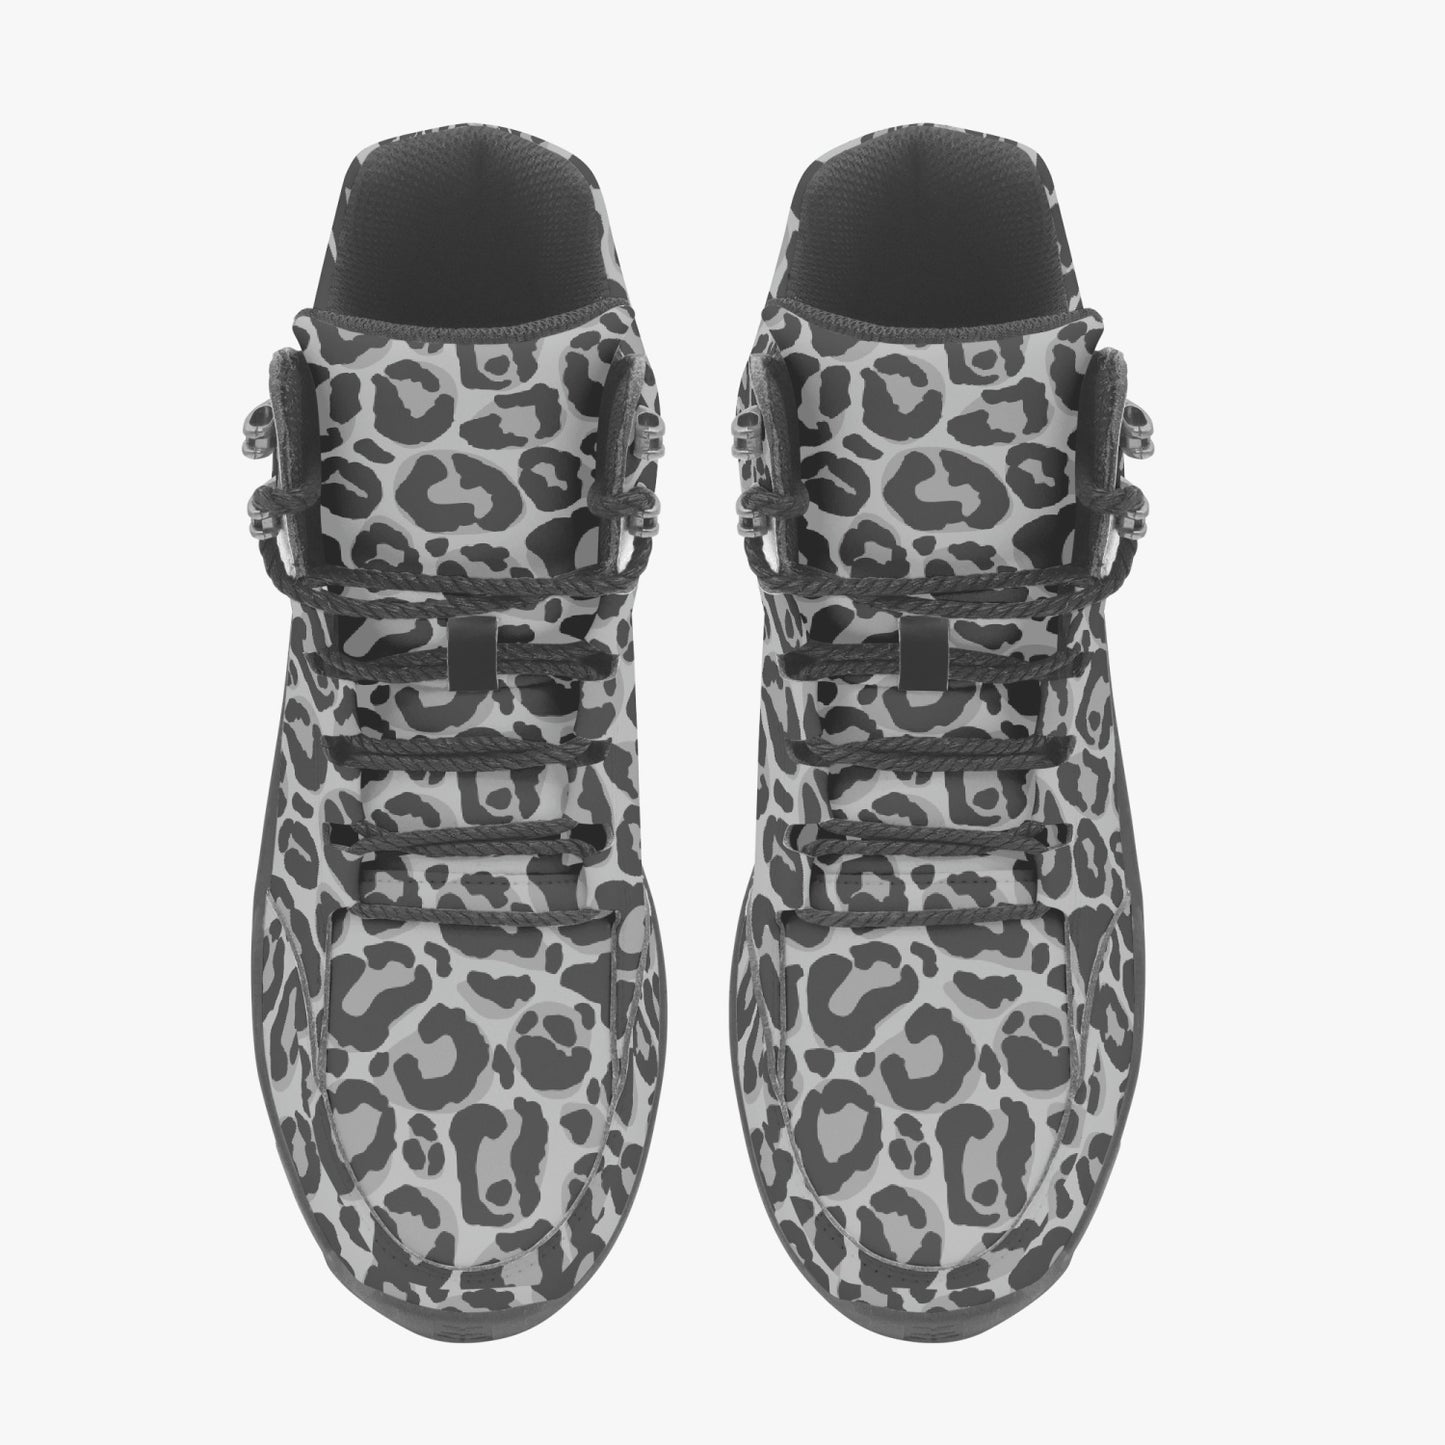 Grey Leopard Hiking Leather Boots, Gray Animal Cheetah Print Men Women Lace Up Walking Hunting Rubber Shoes Print Ankle Winter Casual Work